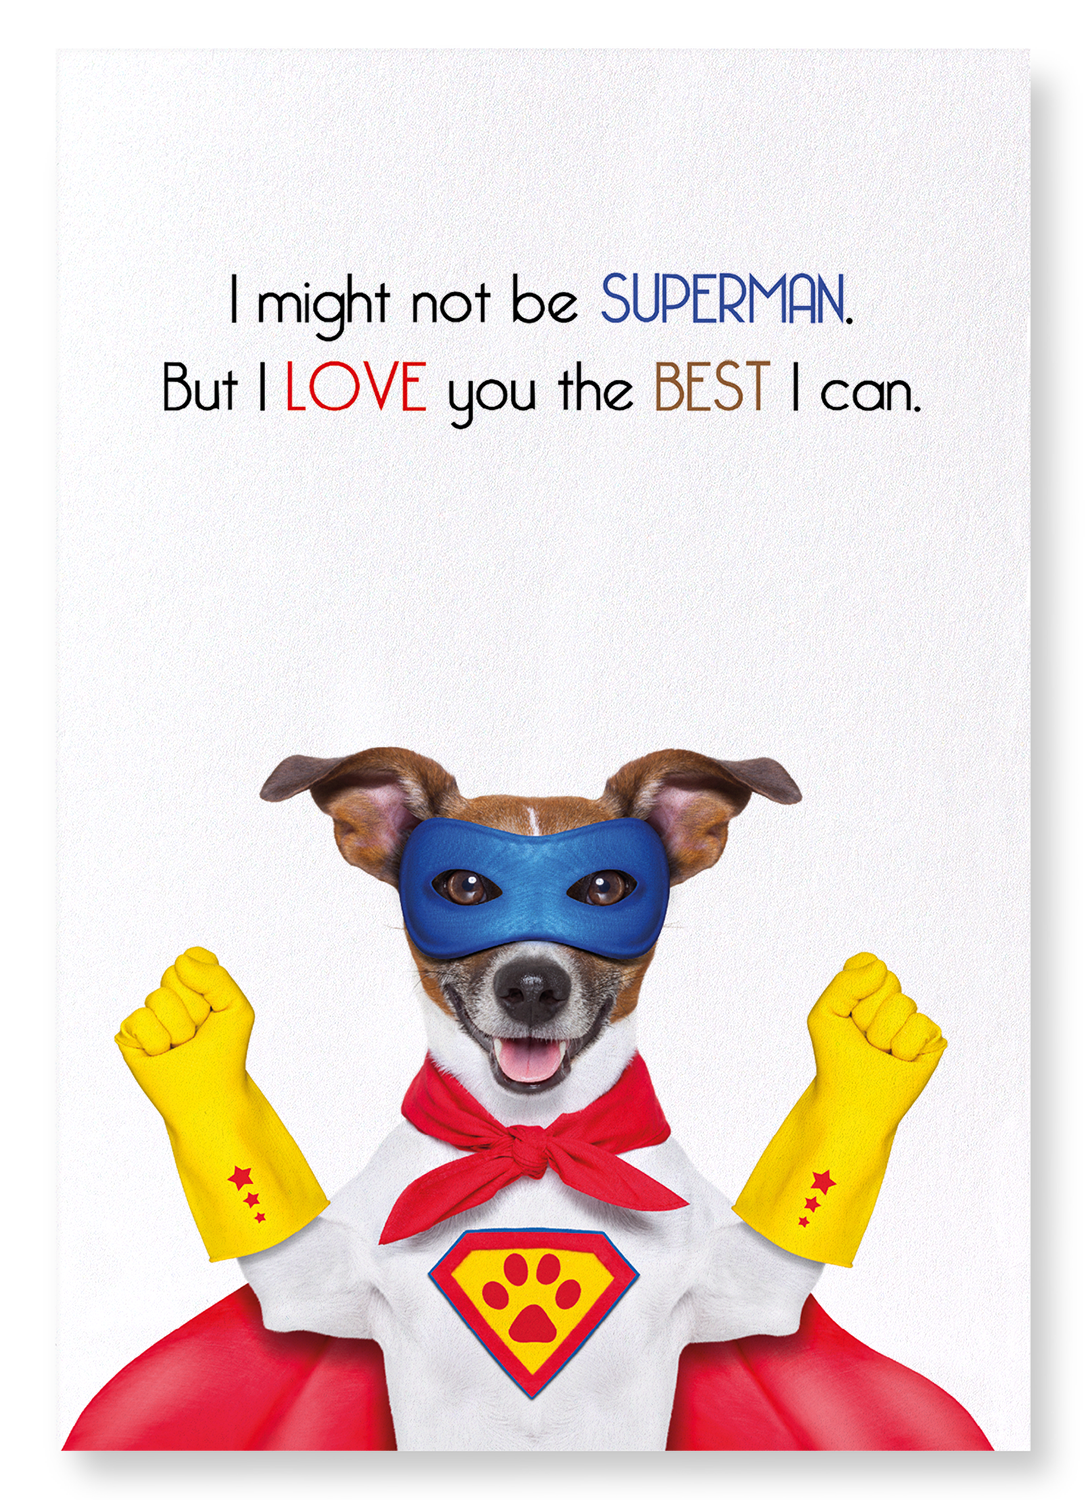 I LOVE YOU THE BEST I CAN: Funny Animal Art print